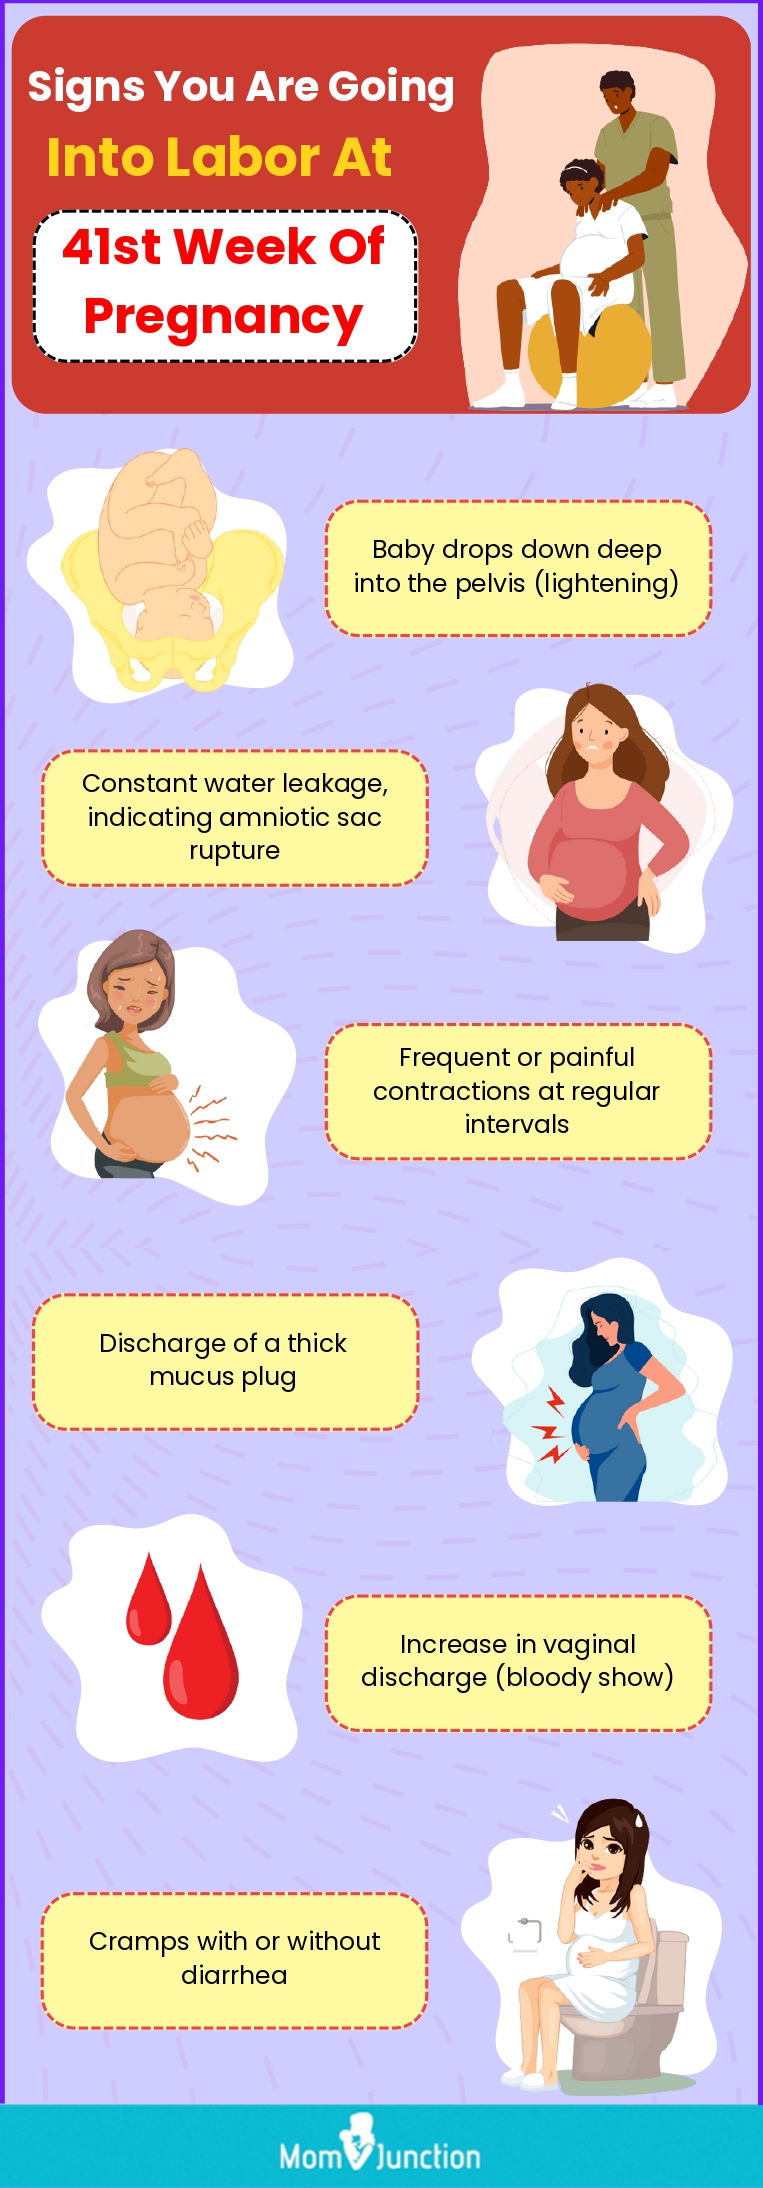 signs you are going into labor at 41st week of pregnancy (infographic)